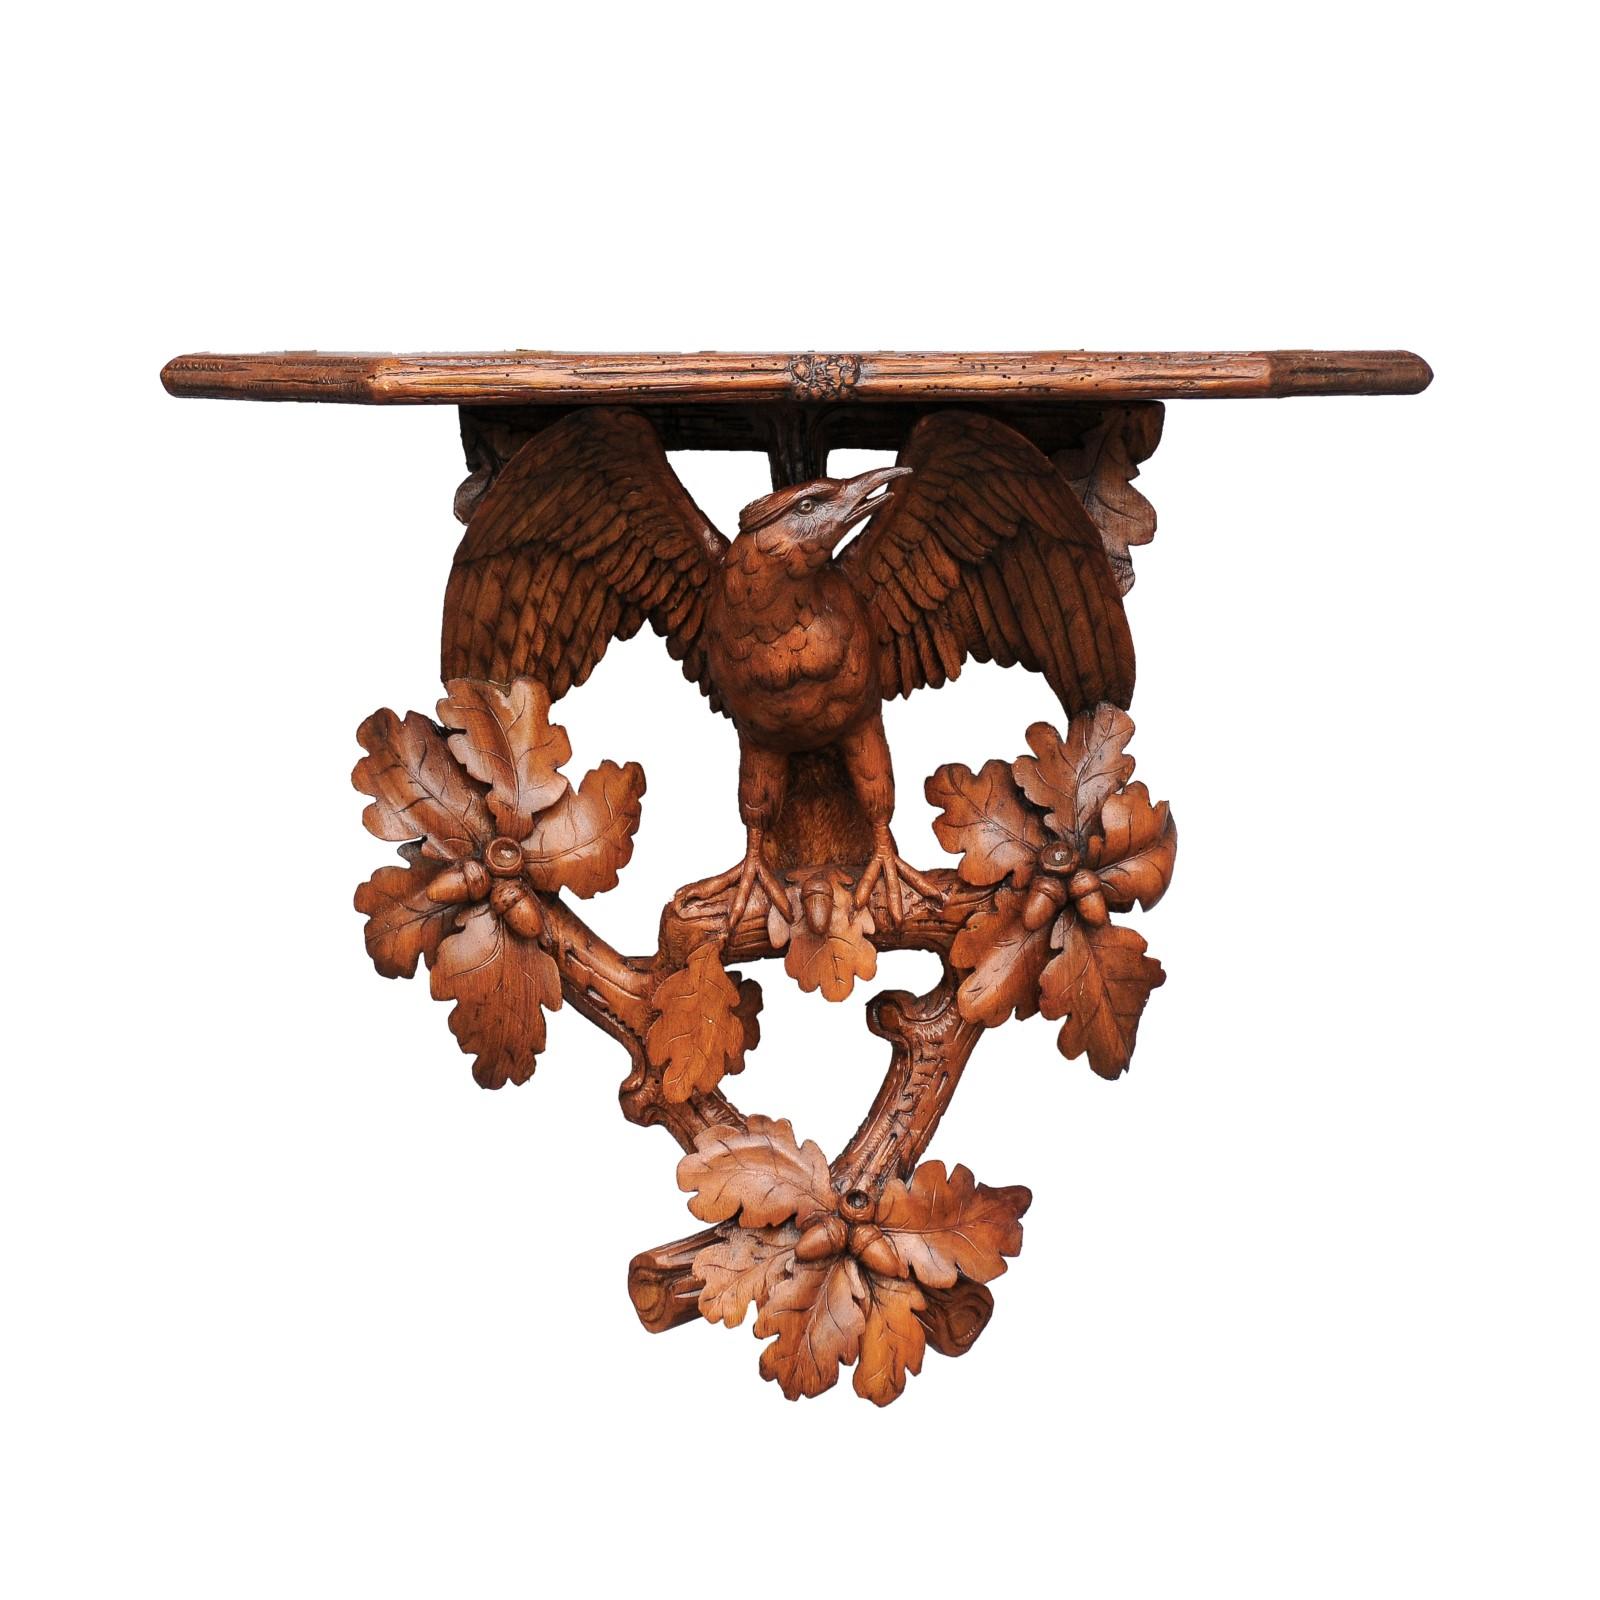 Swiss Black Forest 1890s Wall Bracket with Hand-Carved Eagle and Oak Leaf Motifs